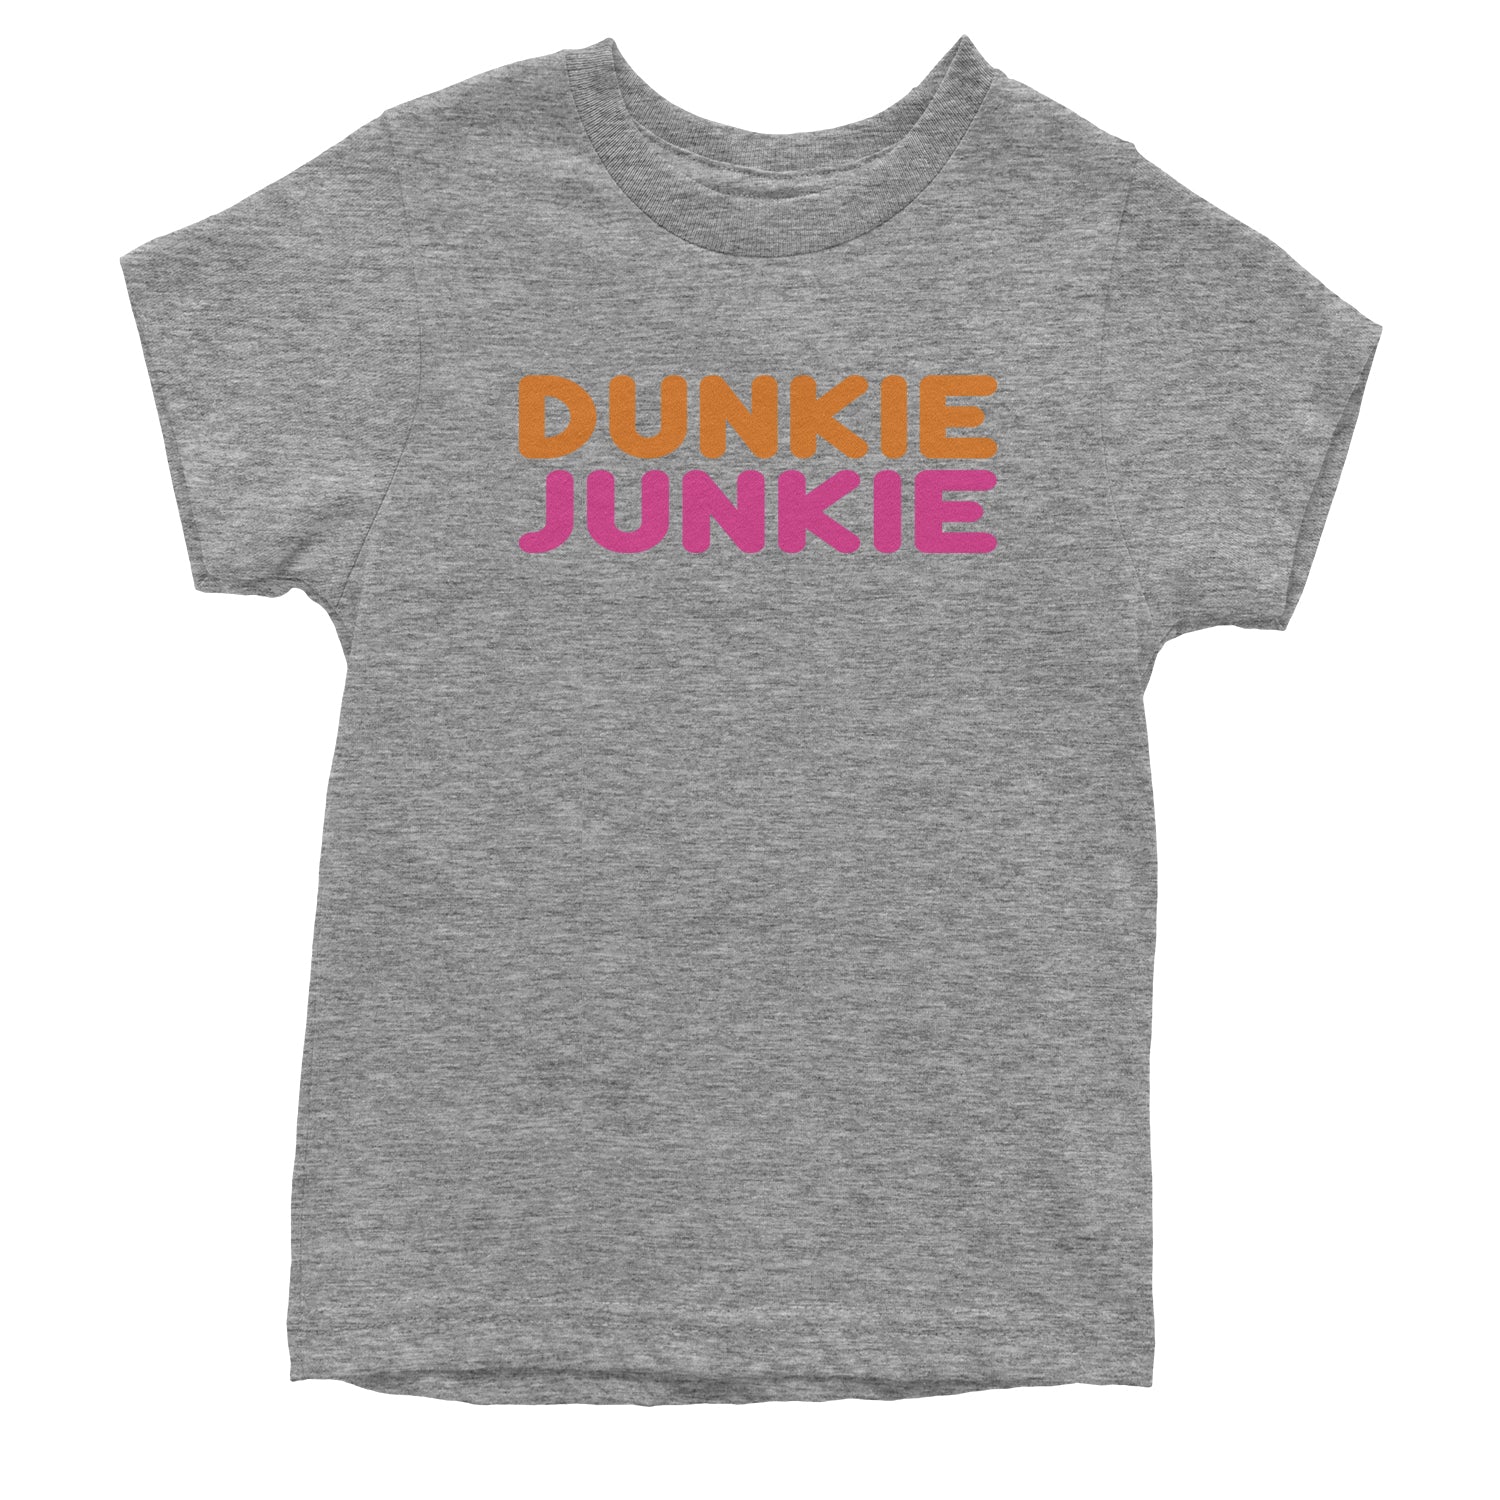 Dunkie Junkie Youth T-shirt addict, capuccino, coffee, dd, dnkn, dunkin, dunking, latte by Expression Tees